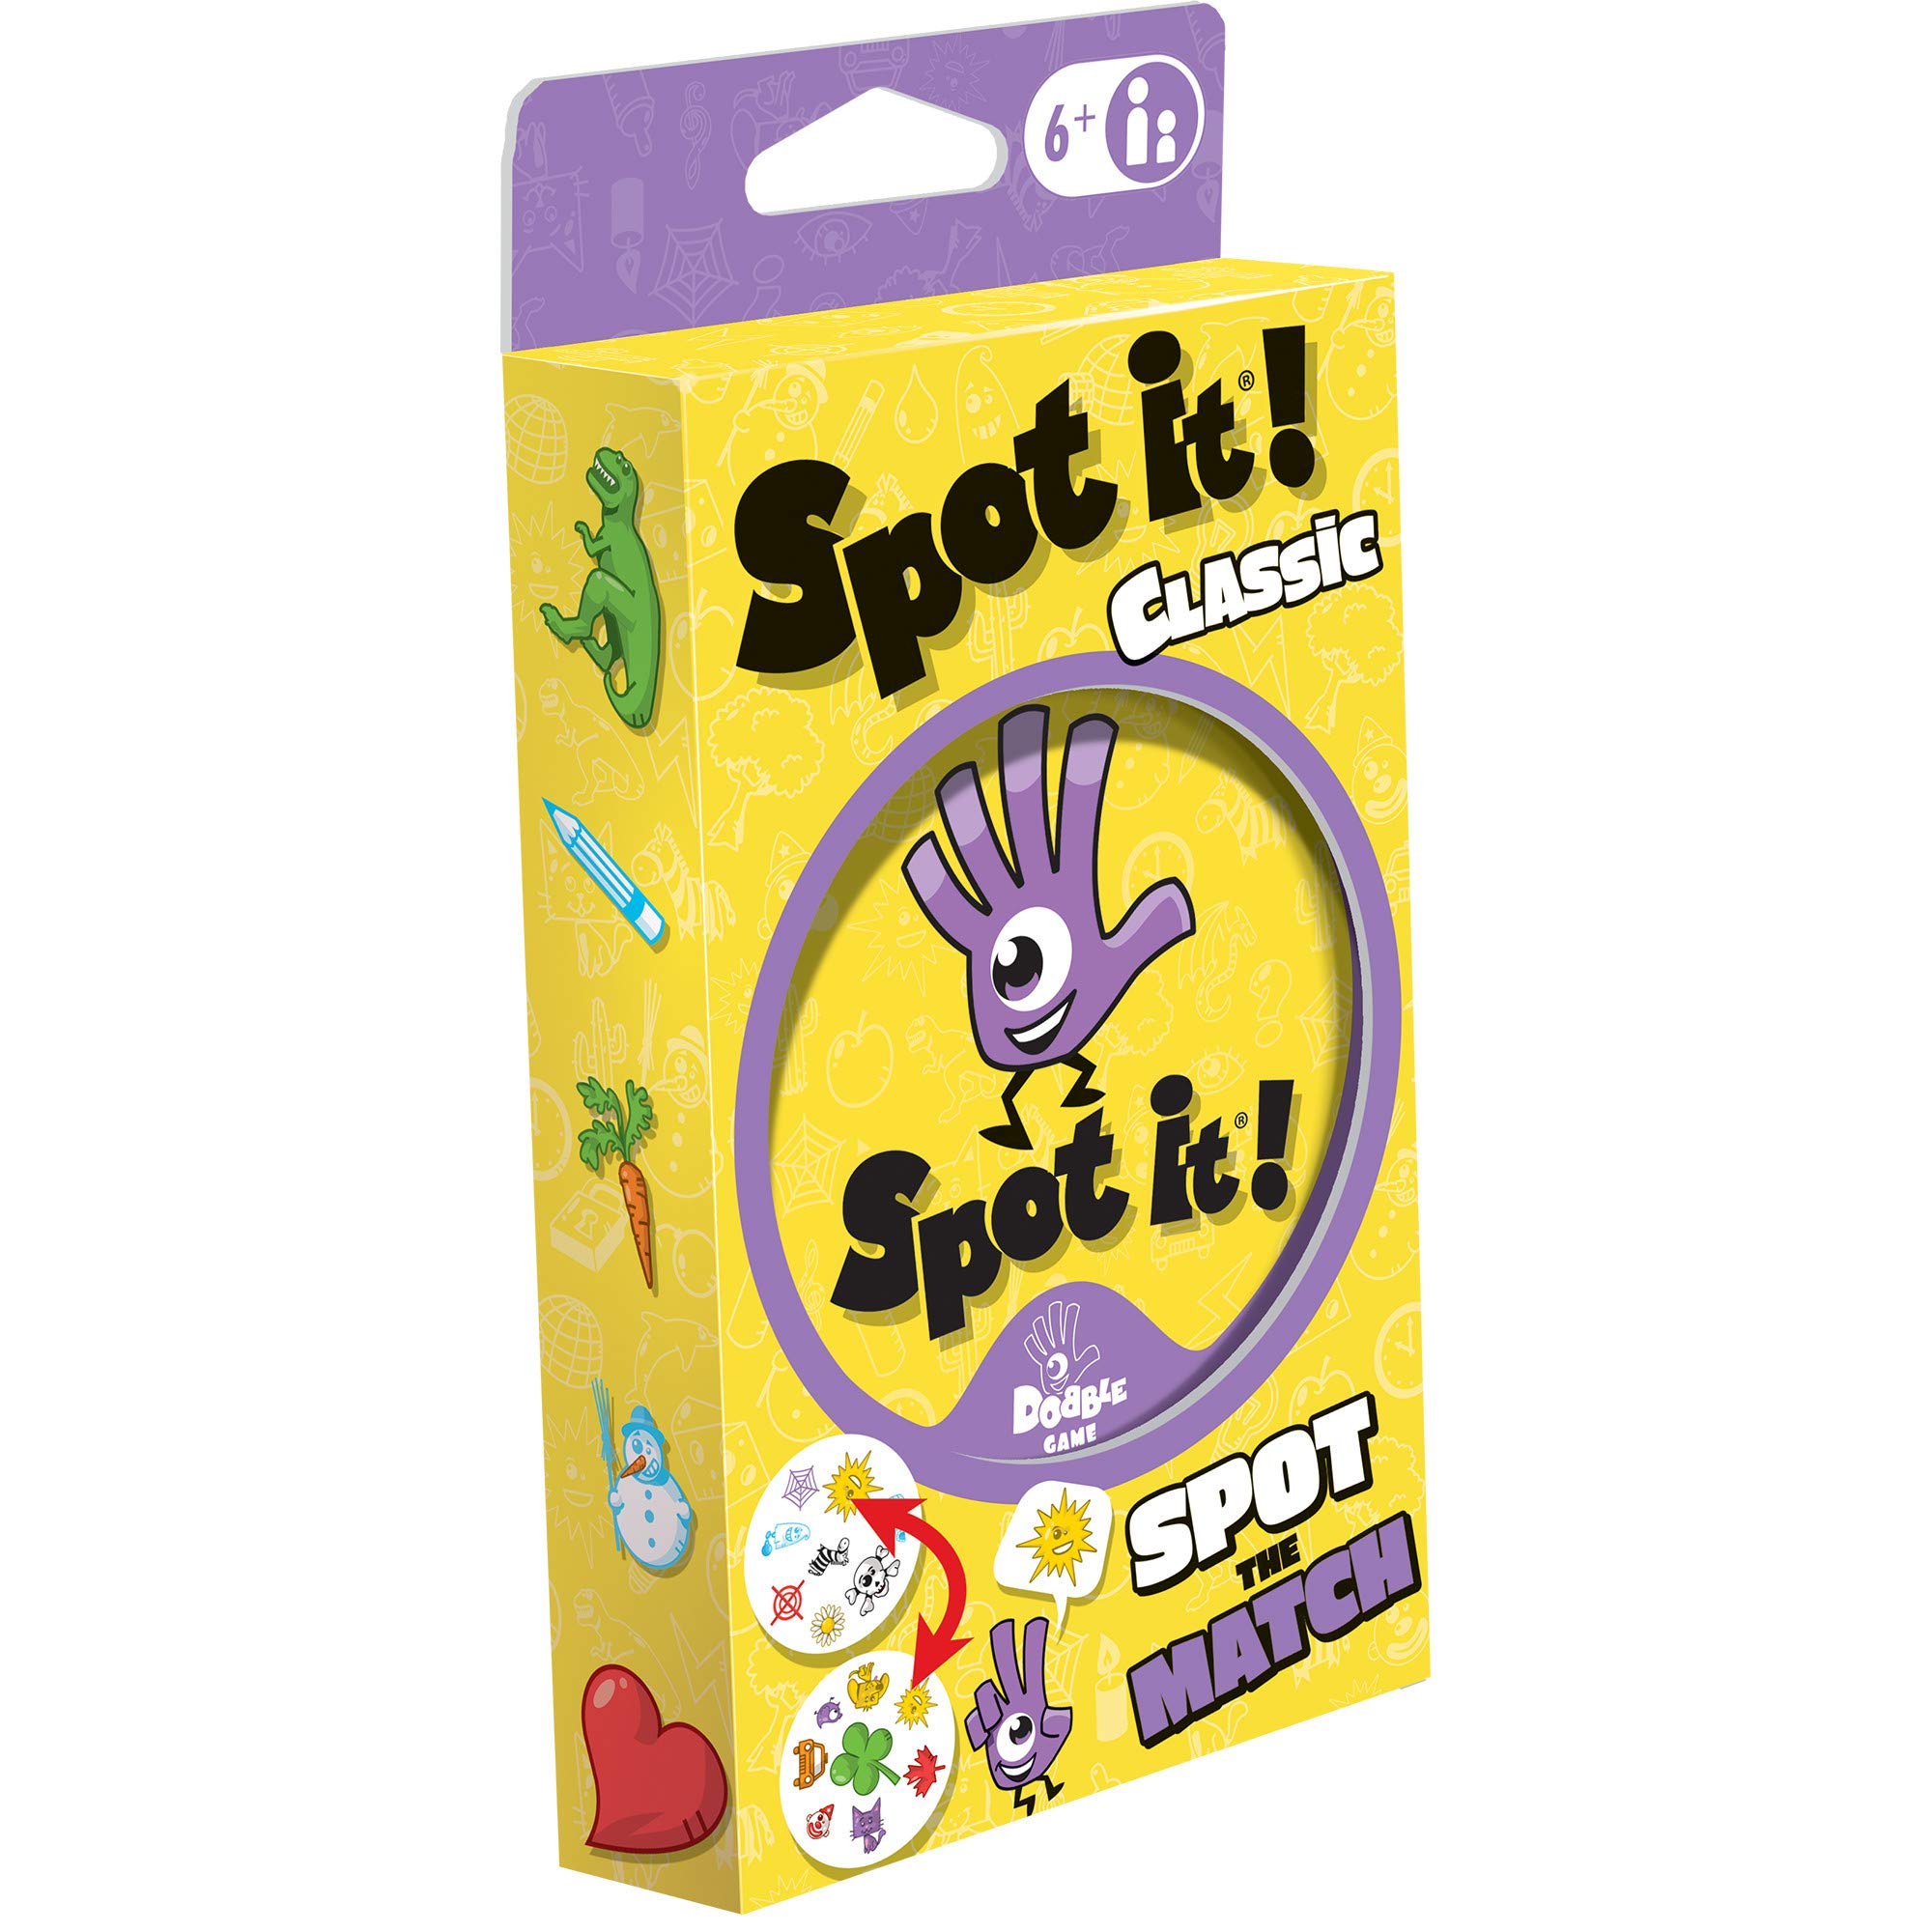 Spot It! Classic Card Game (Eco-Blister)| Matching Game | Fun Kids Game for Family Game Night | Travel Game for Kids | Great Gift | Ages 6+ | 2-8 Players | Avg. Playtime 15 Mins | Made by Zygomatic